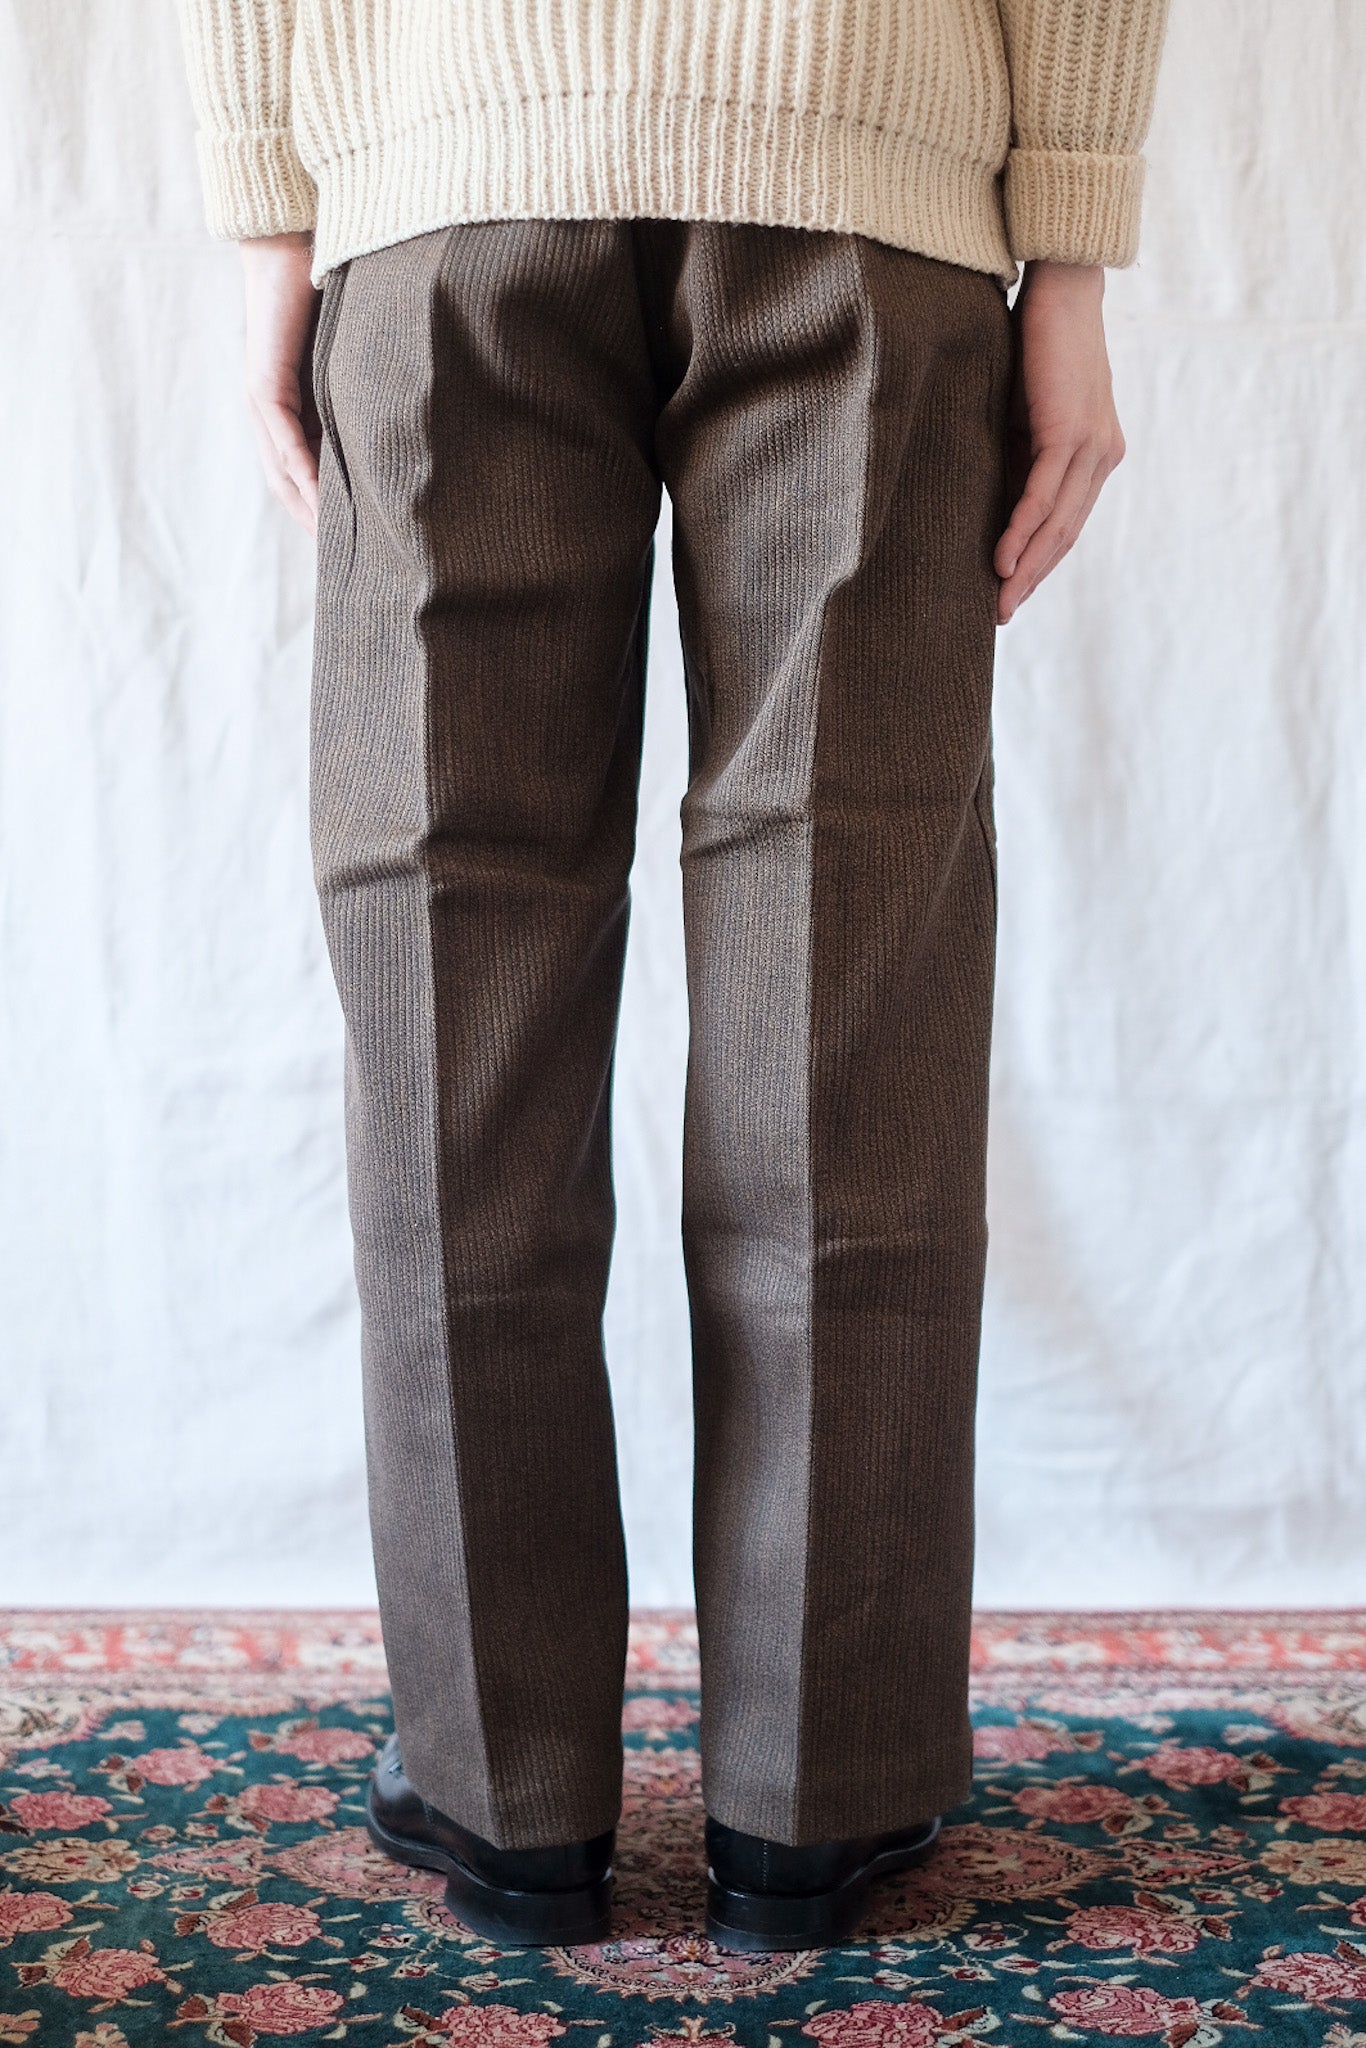 【~50's】French Vintage Brown Cotton Pique Work Pants "Dead Stock"